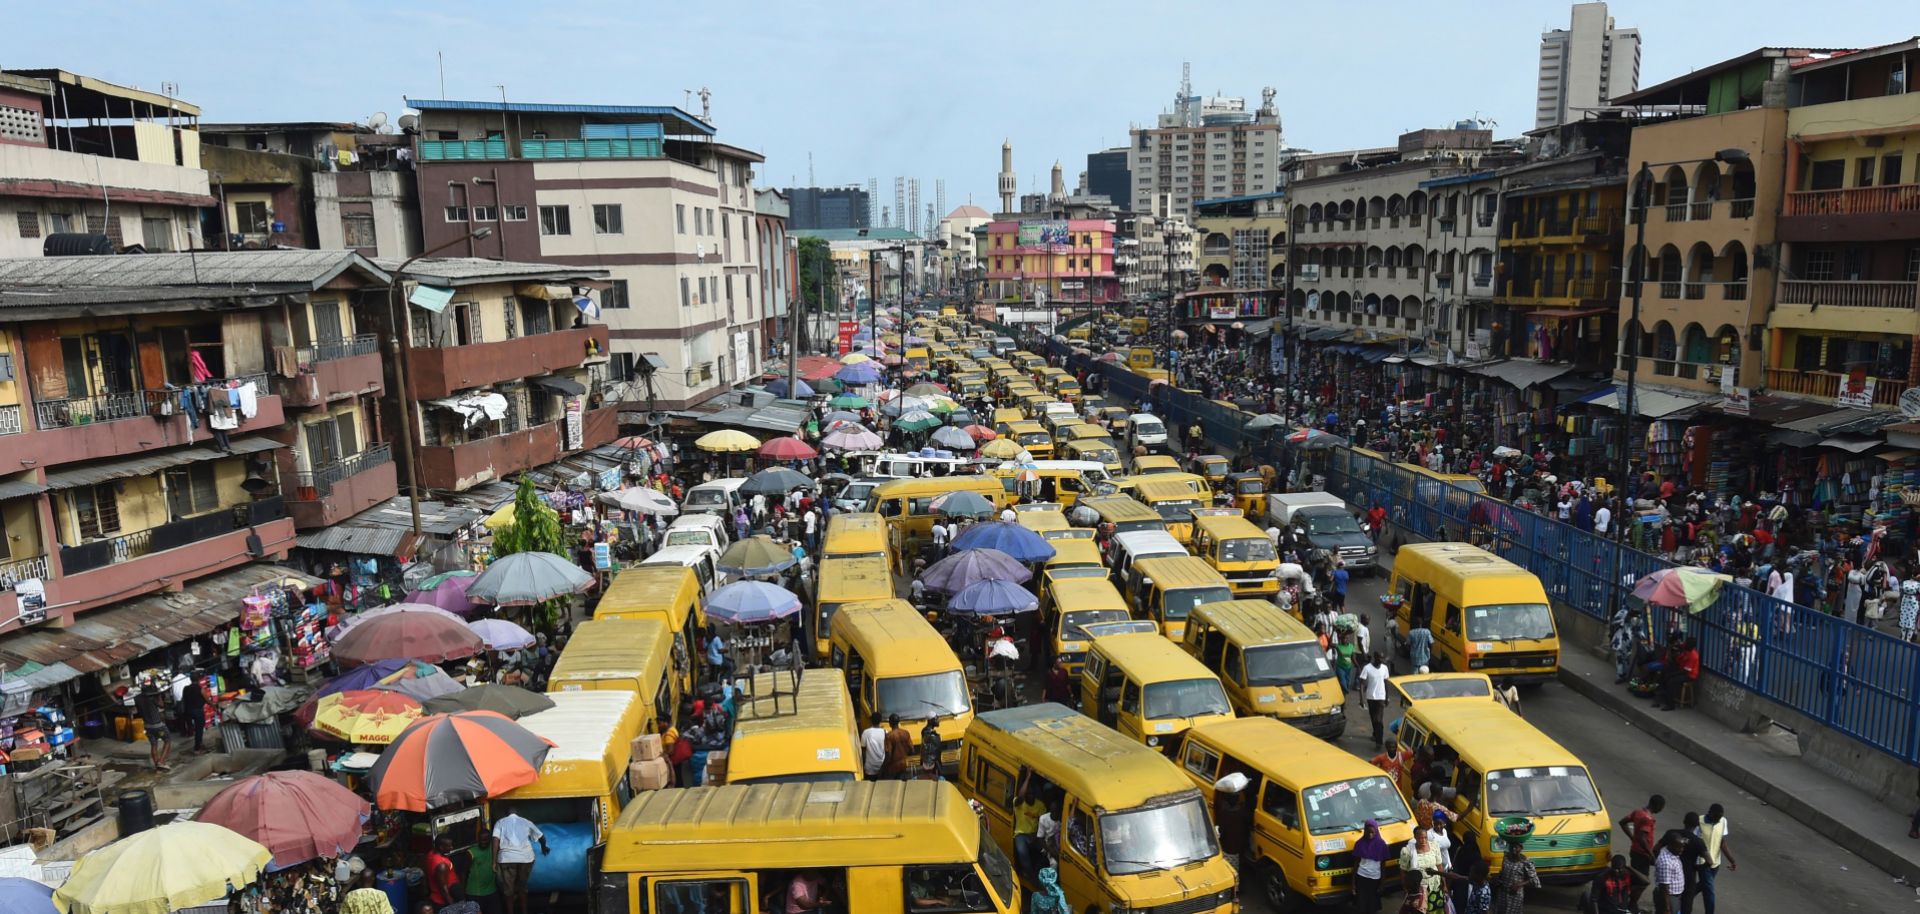 Public transportation minibuses barricade the roads in search of passengers, causing traffic gridlock in Lagos. 